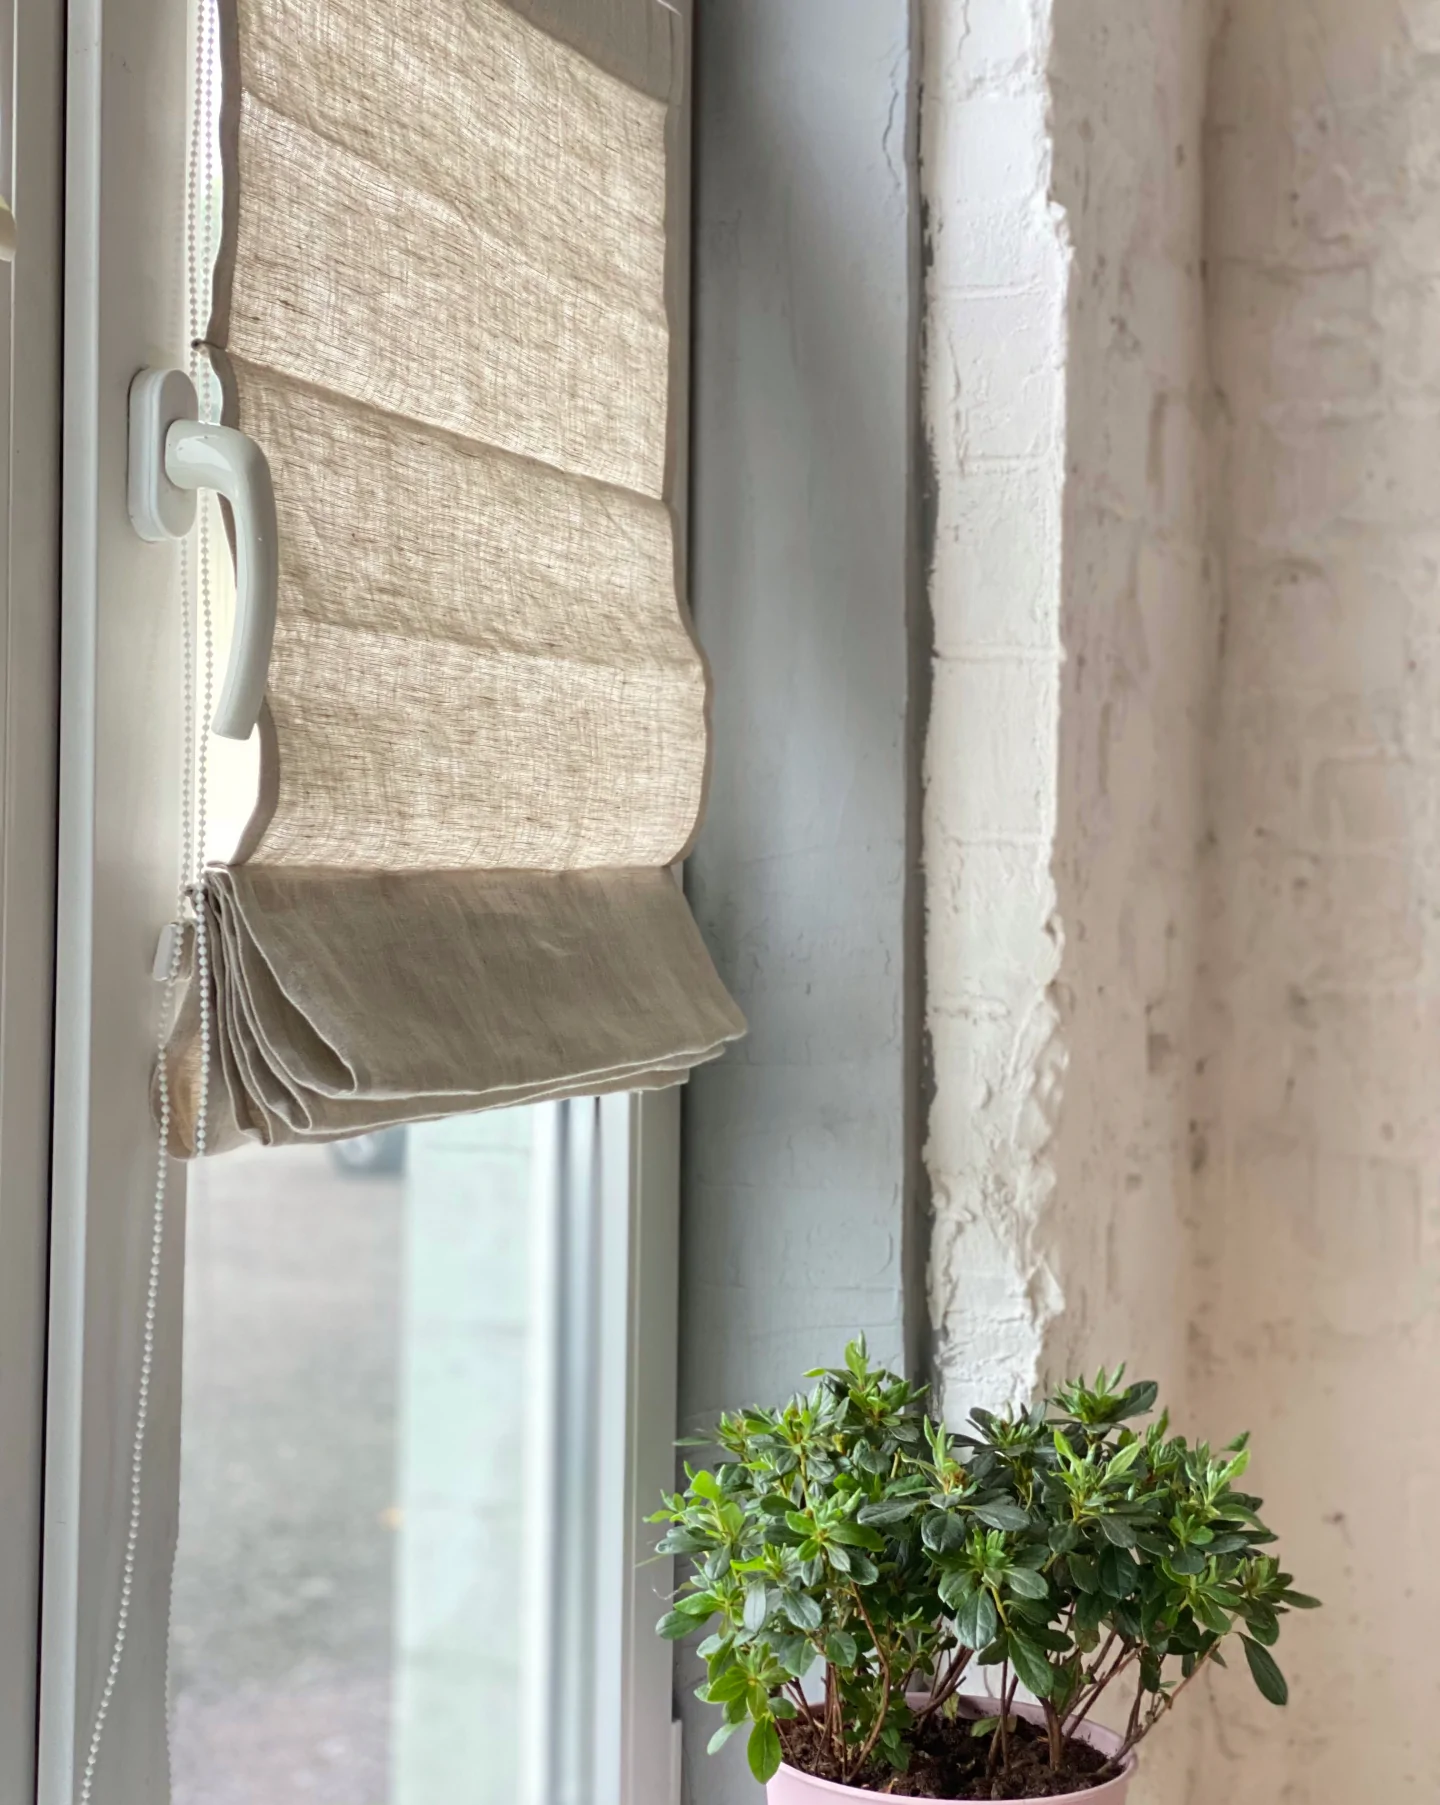 Mounting the Roman Blinds